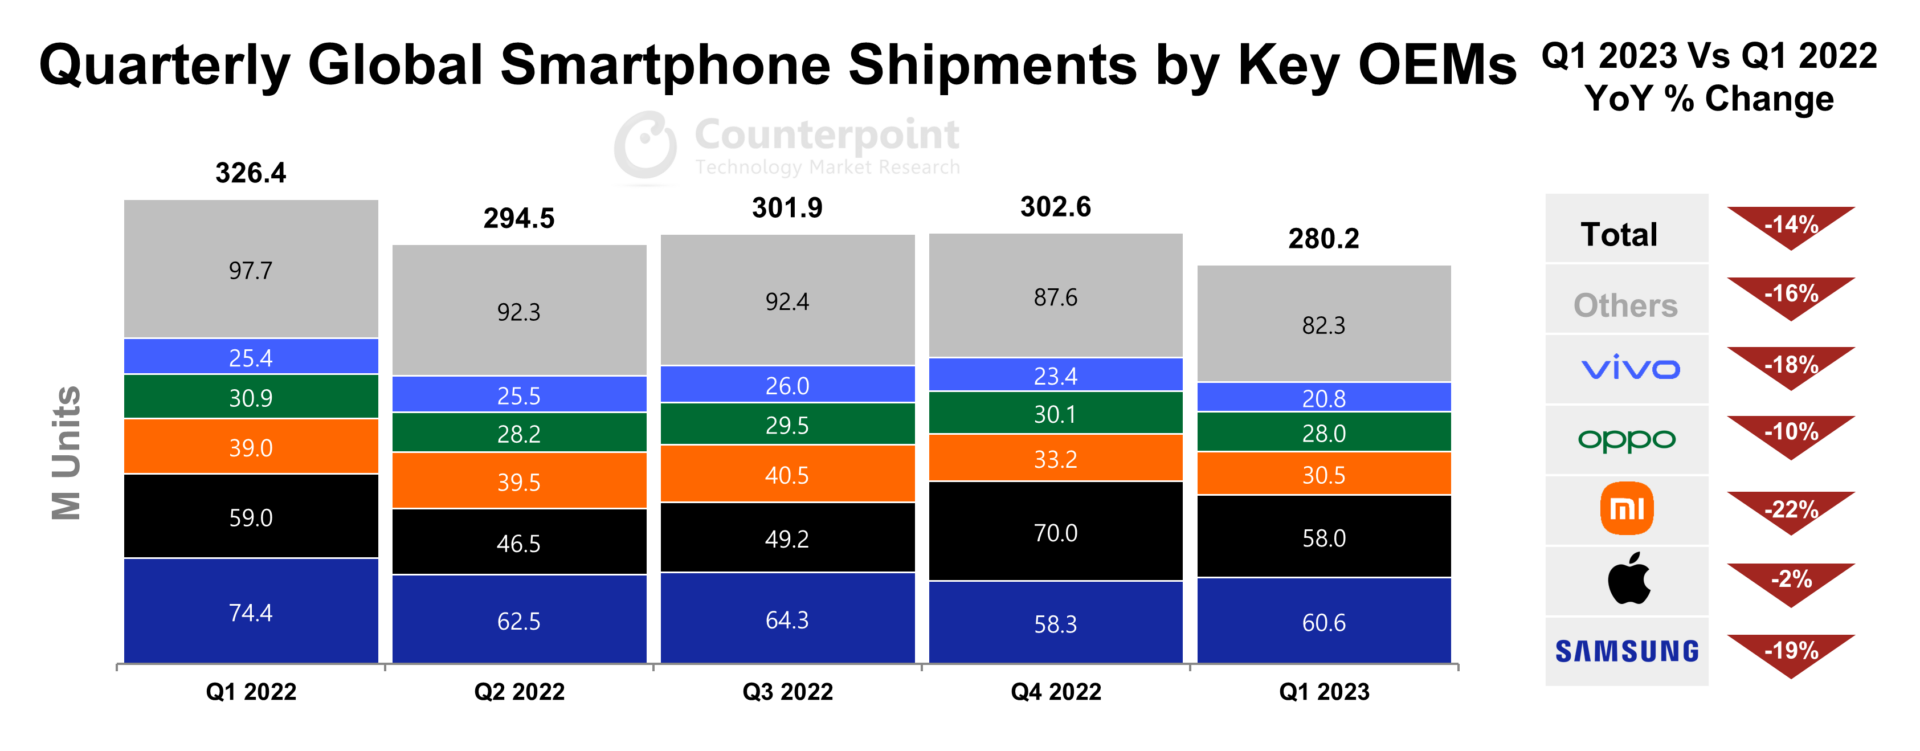 Apple And Samsung Dominate Q123 Amid Global Smartphone Market Contraction And Economic 